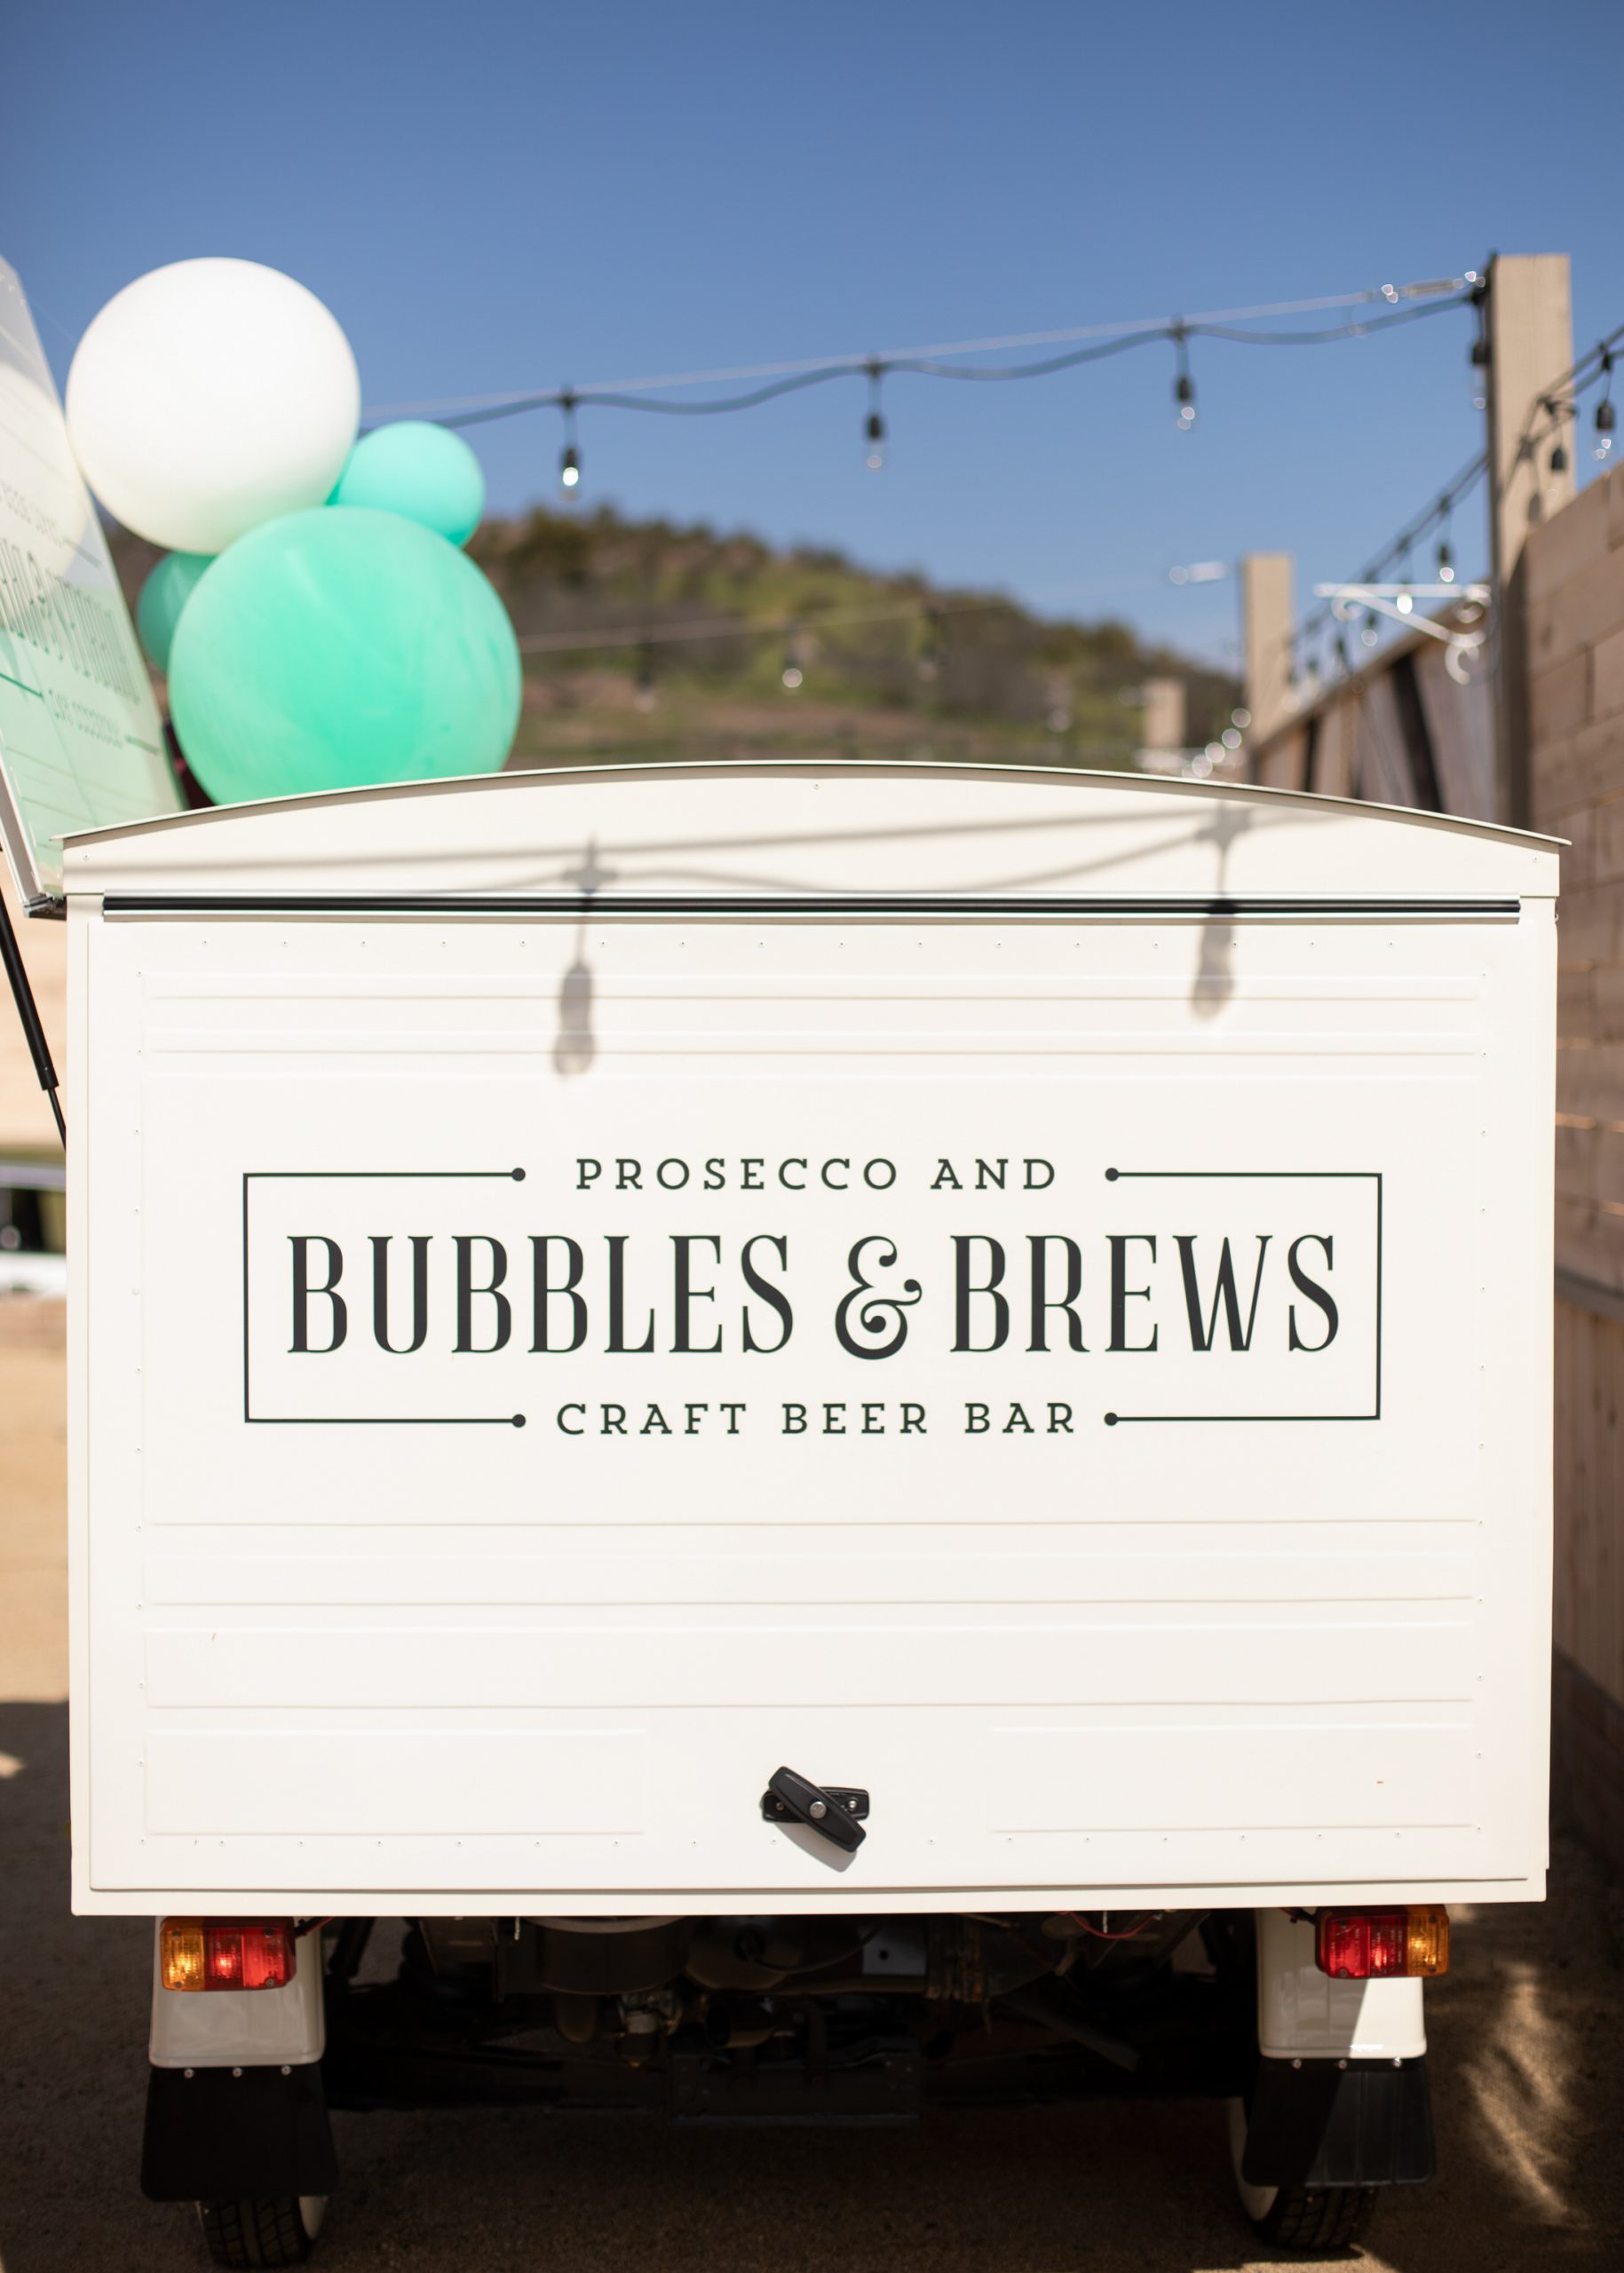 Bubbles and Brews, prosecco and craft beer bar signature cocktails during a tropical wedding in Temucula, CA.